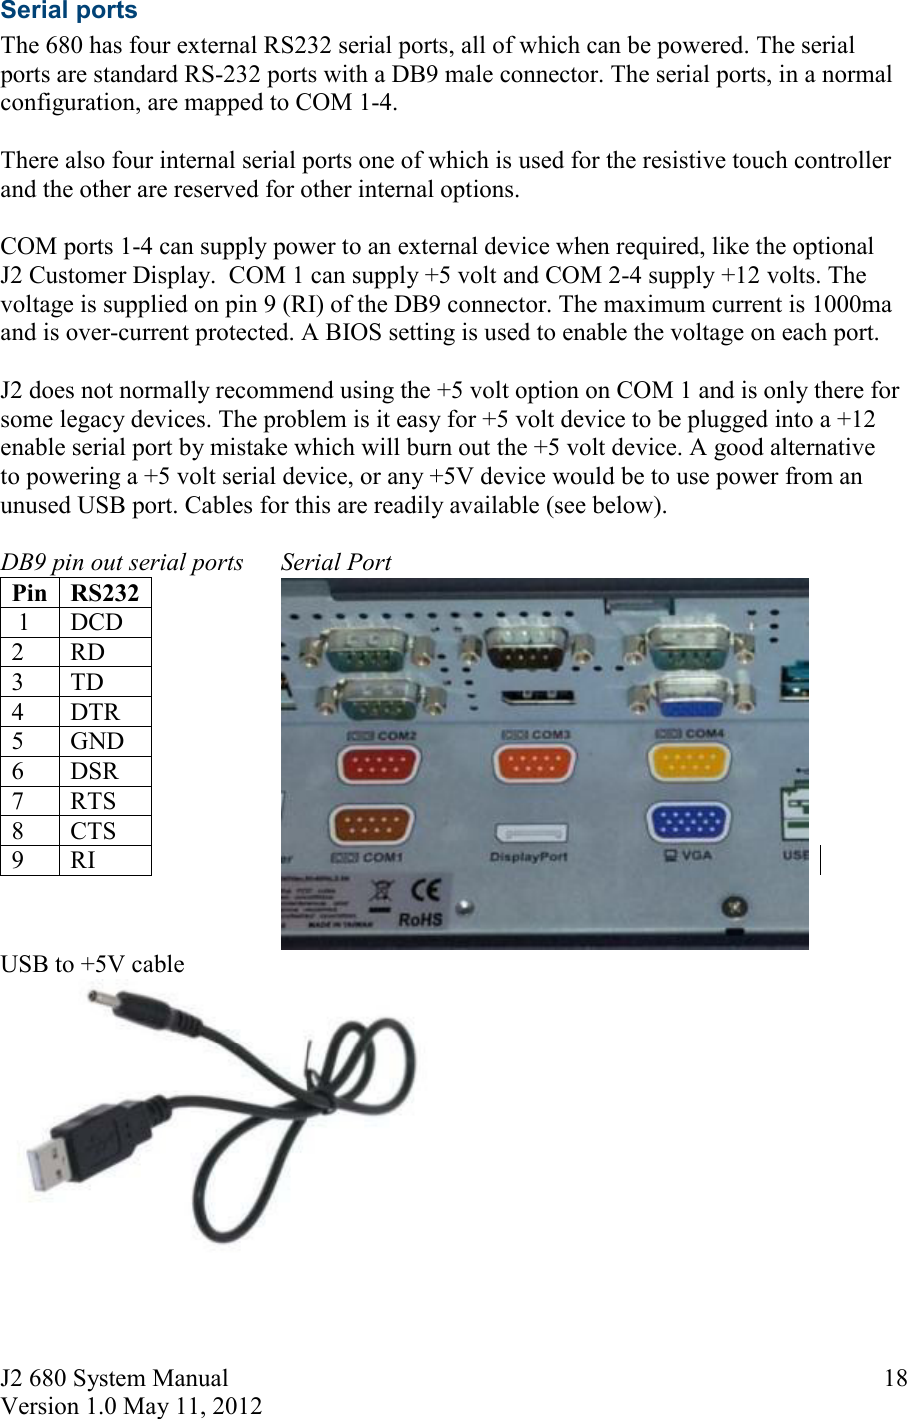 J2 680 System Manual Version 1.0 May 11, 2012     18Serial ports The 680 has four external RS232 serial ports, all of which can be powered. The serial ports are standard RS-232 ports with a DB9 male connector. The serial ports, in a normal configuration, are mapped to COM 1-4.  There also four internal serial ports one of which is used for the resistive touch controller and the other are reserved for other internal options.  COM ports 1-4 can supply power to an external device when required, like the optional J2 Customer Display.  COM 1 can supply +5 volt and COM 2-4 supply +12 volts. The voltage is supplied on pin 9 (RI) of the DB9 connector. The maximum current is 1000ma and is over-current protected. A BIOS setting is used to enable the voltage on each port.  J2 does not normally recommend using the +5 volt option on COM 1 and is only there for some legacy devices. The problem is it easy for +5 volt device to be plugged into a +12 enable serial port by mistake which will burn out the +5 volt device. A good alternative to powering a +5 volt serial device, or any +5V device would be to use power from an unused USB port. Cables for this are readily available (see below).  DB9 pin out serial ports      Serial Port Pin RS232                      1  DCD 2  RD 3  TD 4  DTR 5  GND 6  DSR 7  RTS 8  CTS 9  RI    USB to +5V cable 